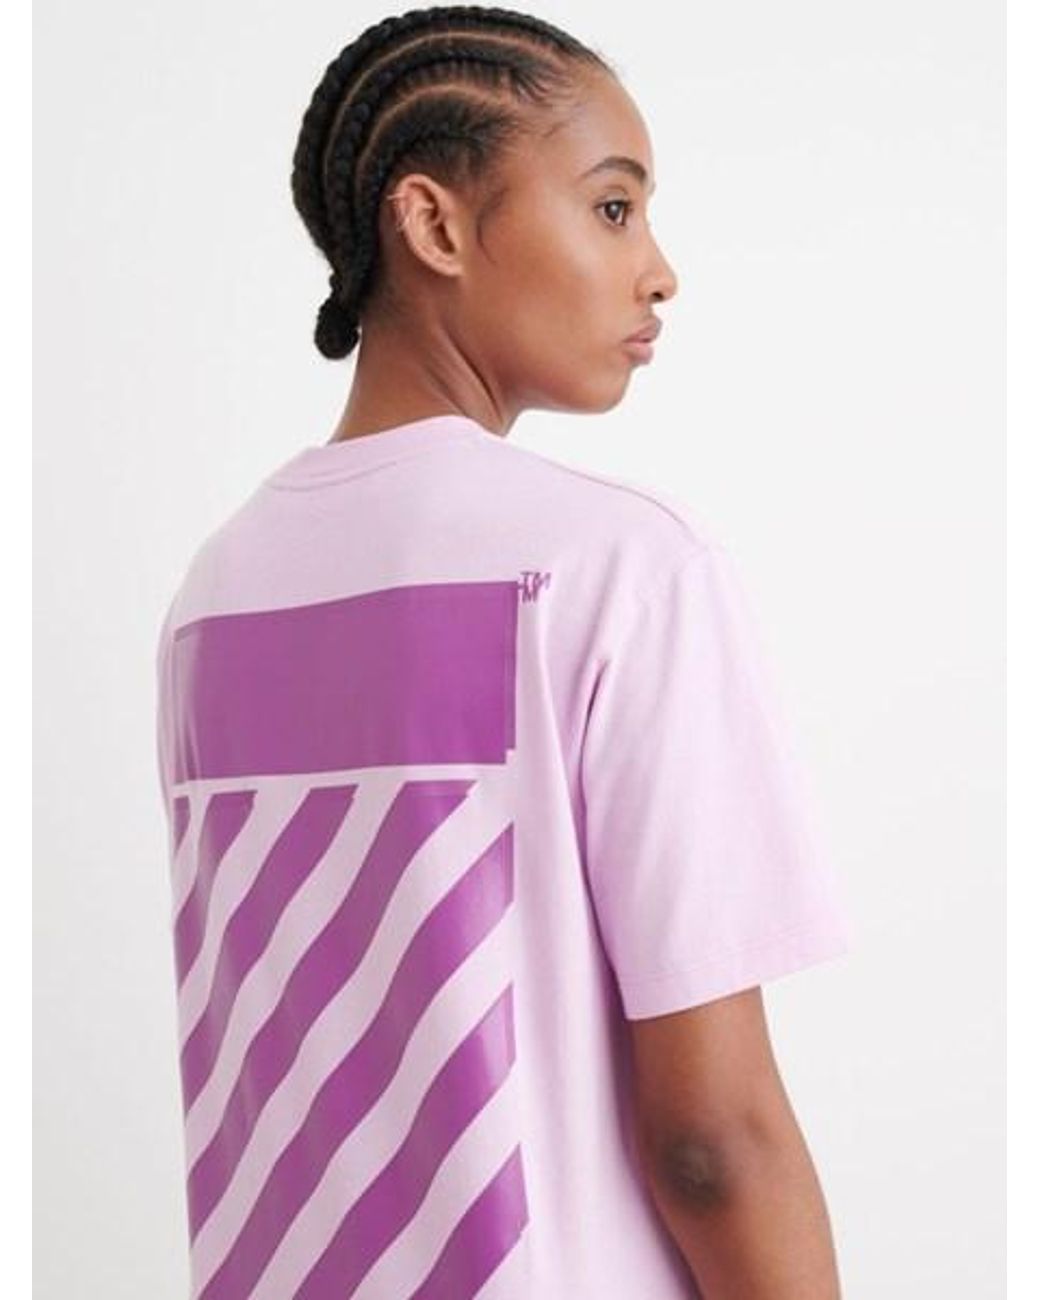 Off-White c/o Virgil Abloh "diag" Pink T-shirt For Women in Purple | Lyst